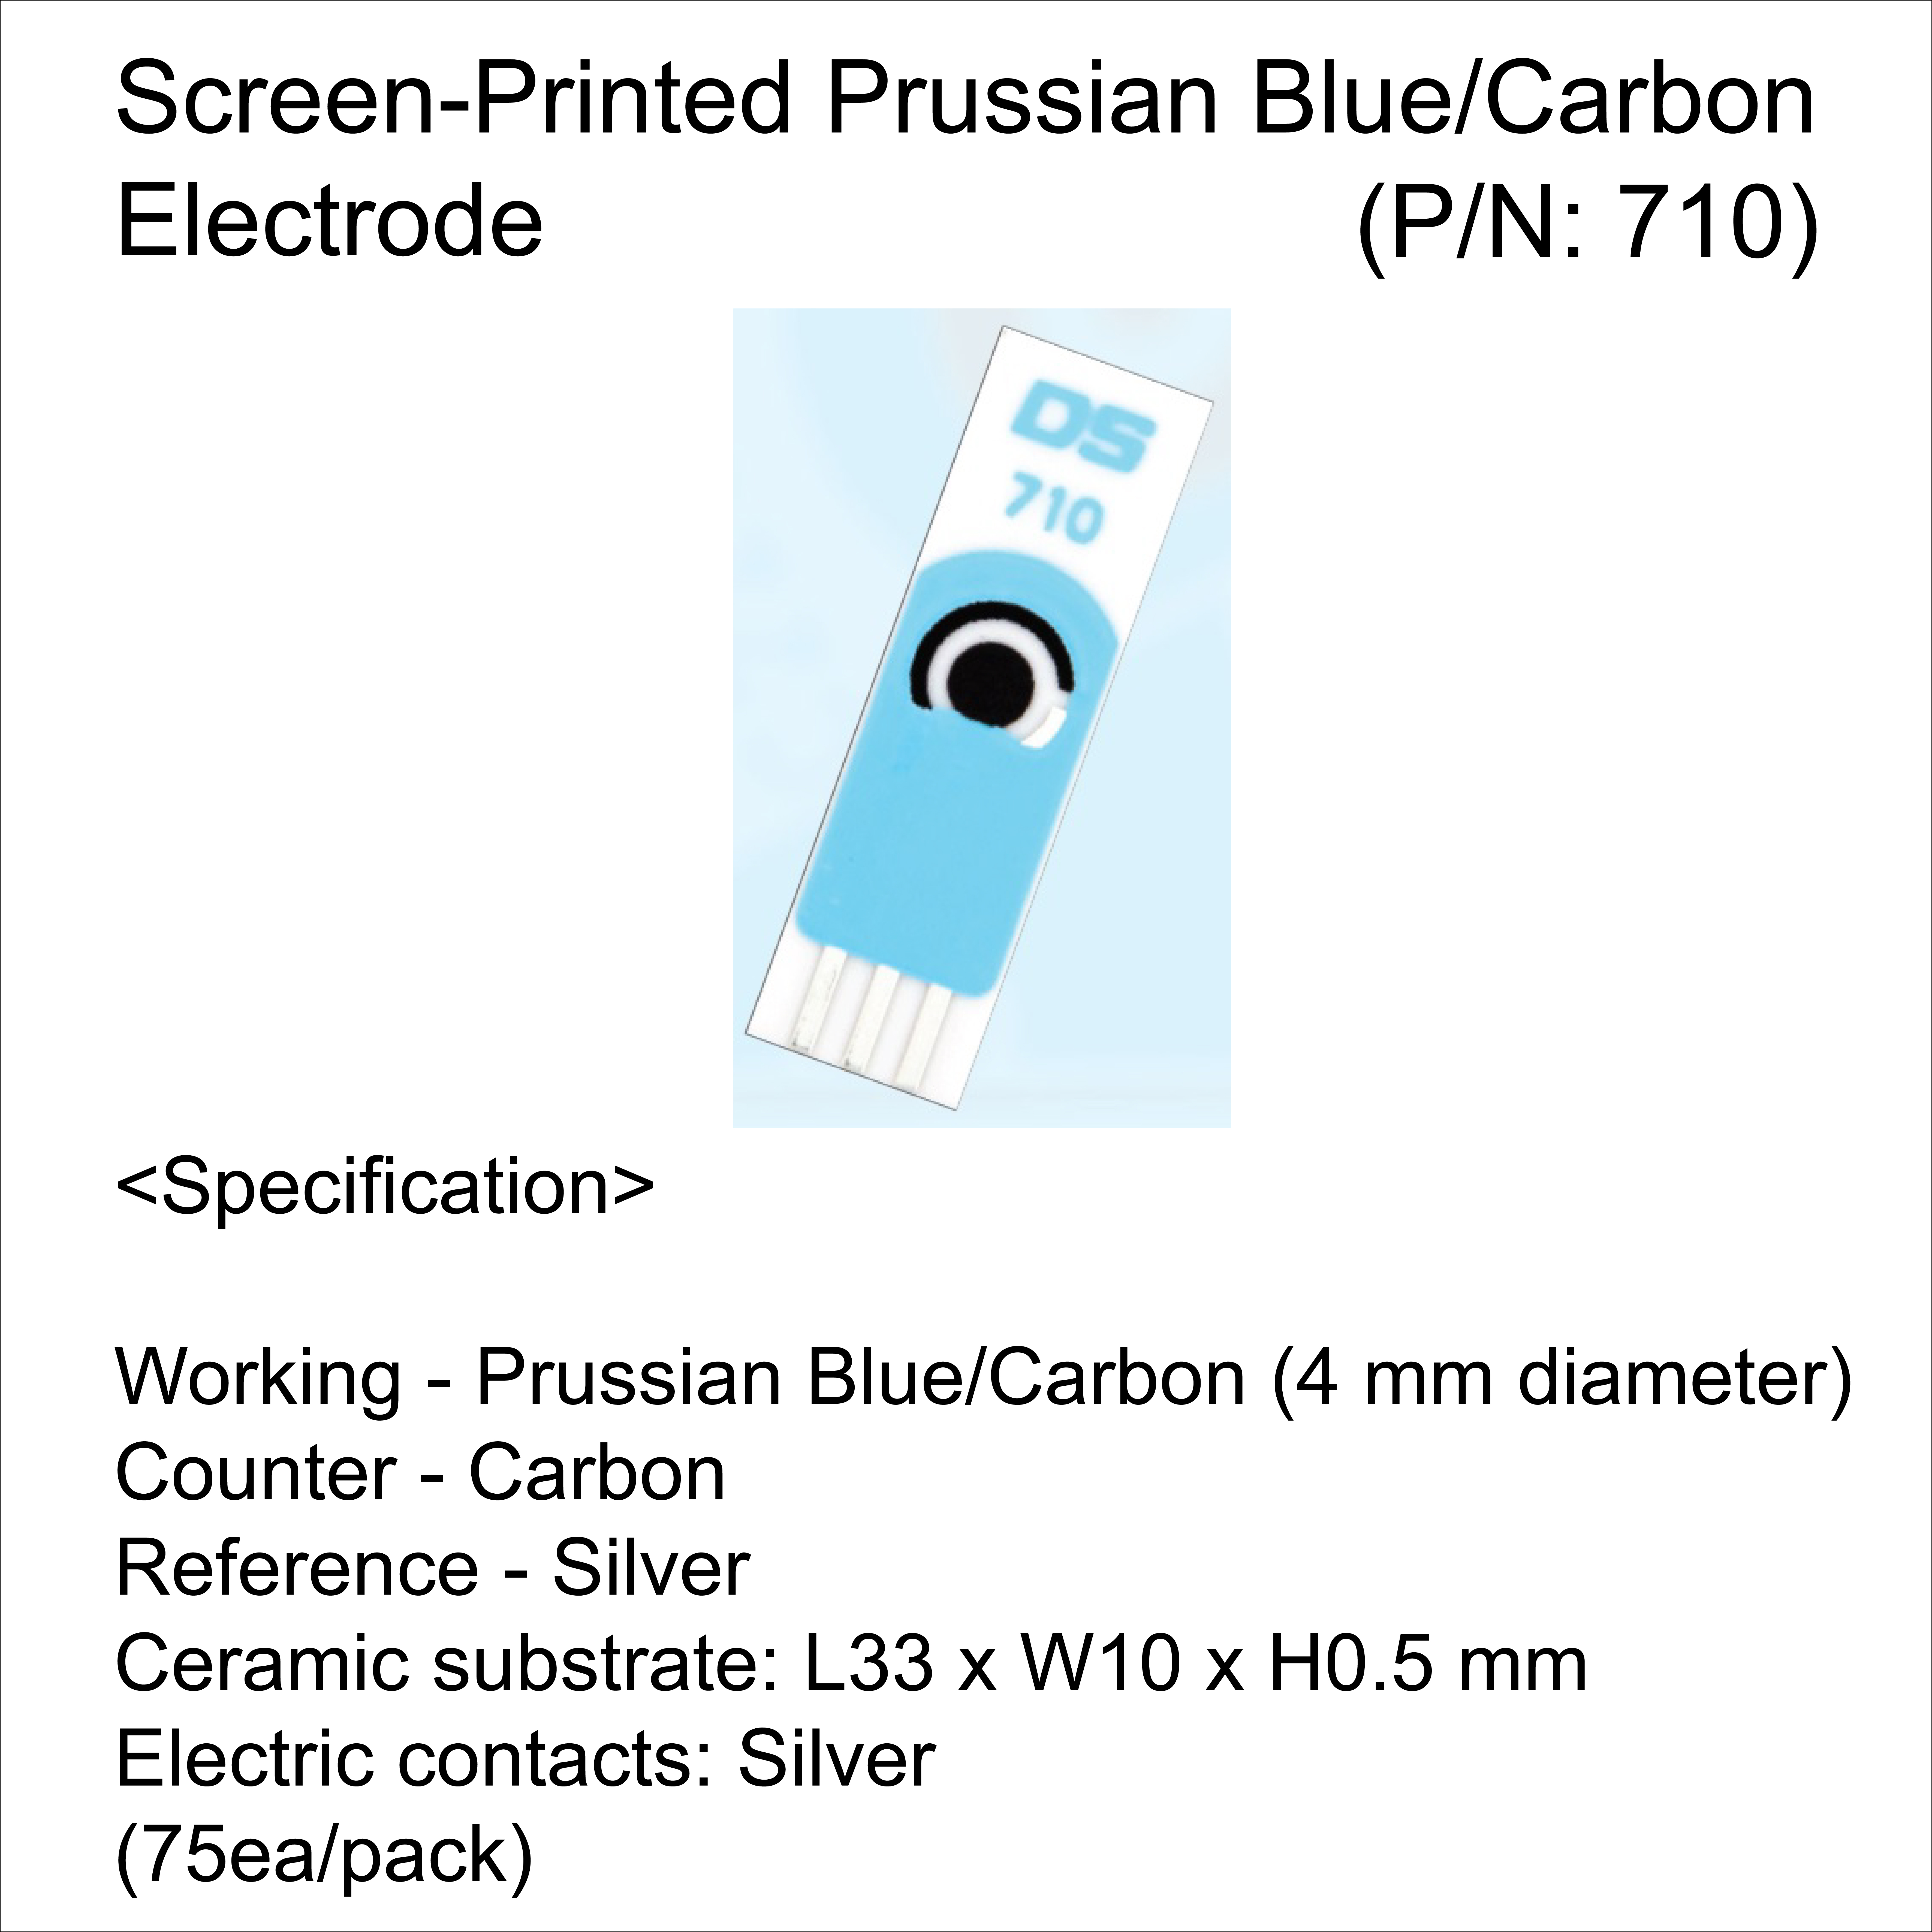 Screen-Printed Prussian Blue/Carbon Electrode